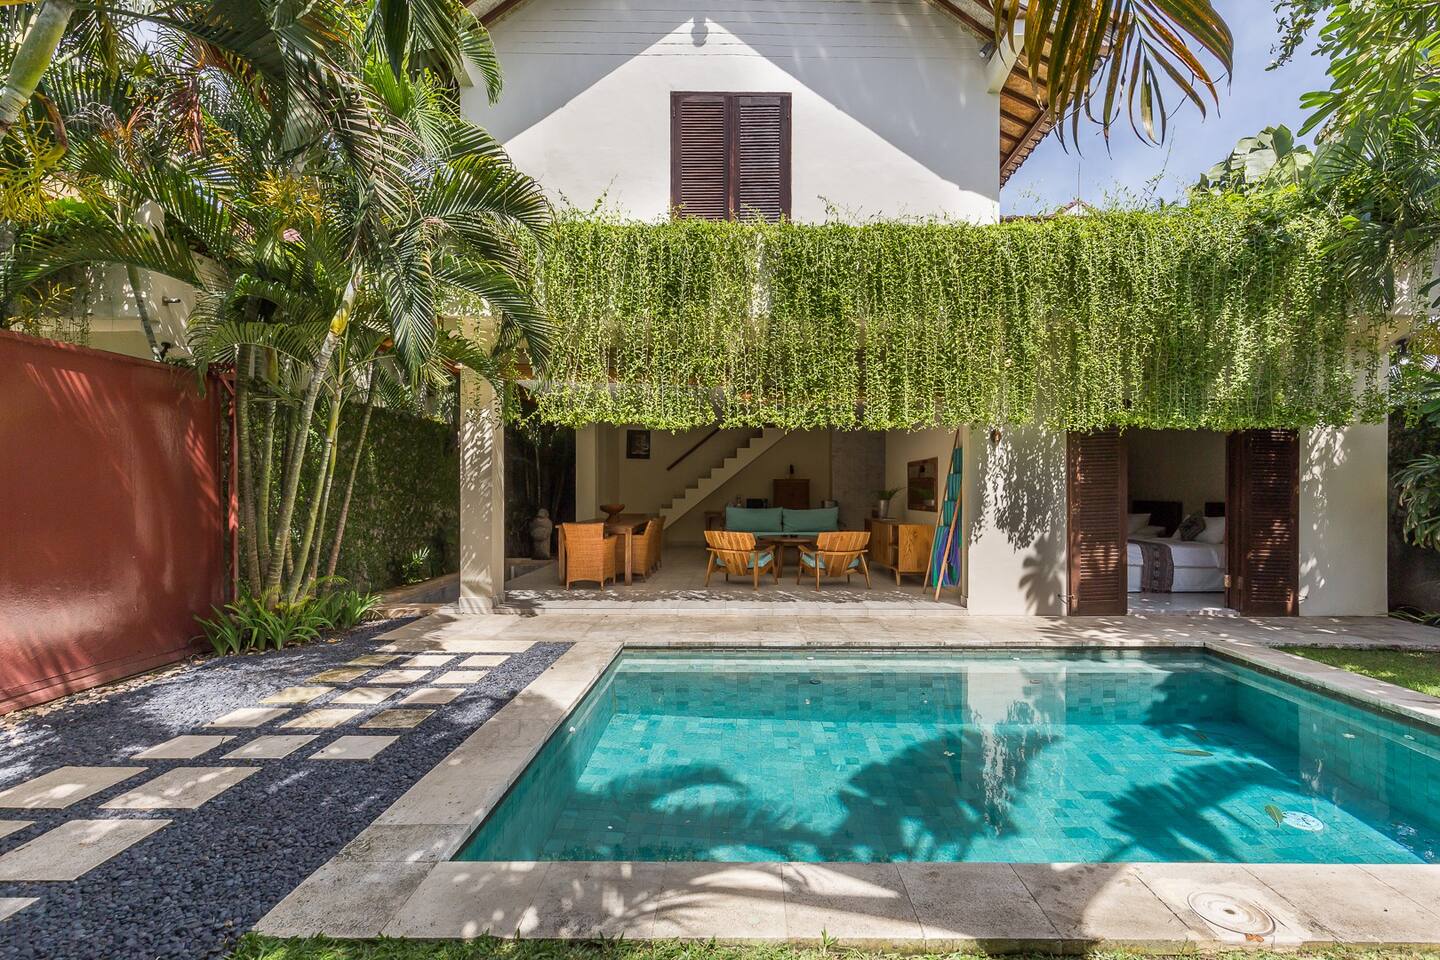 Villa Minpi in Bali is one of the best Airbnb homes on the island.